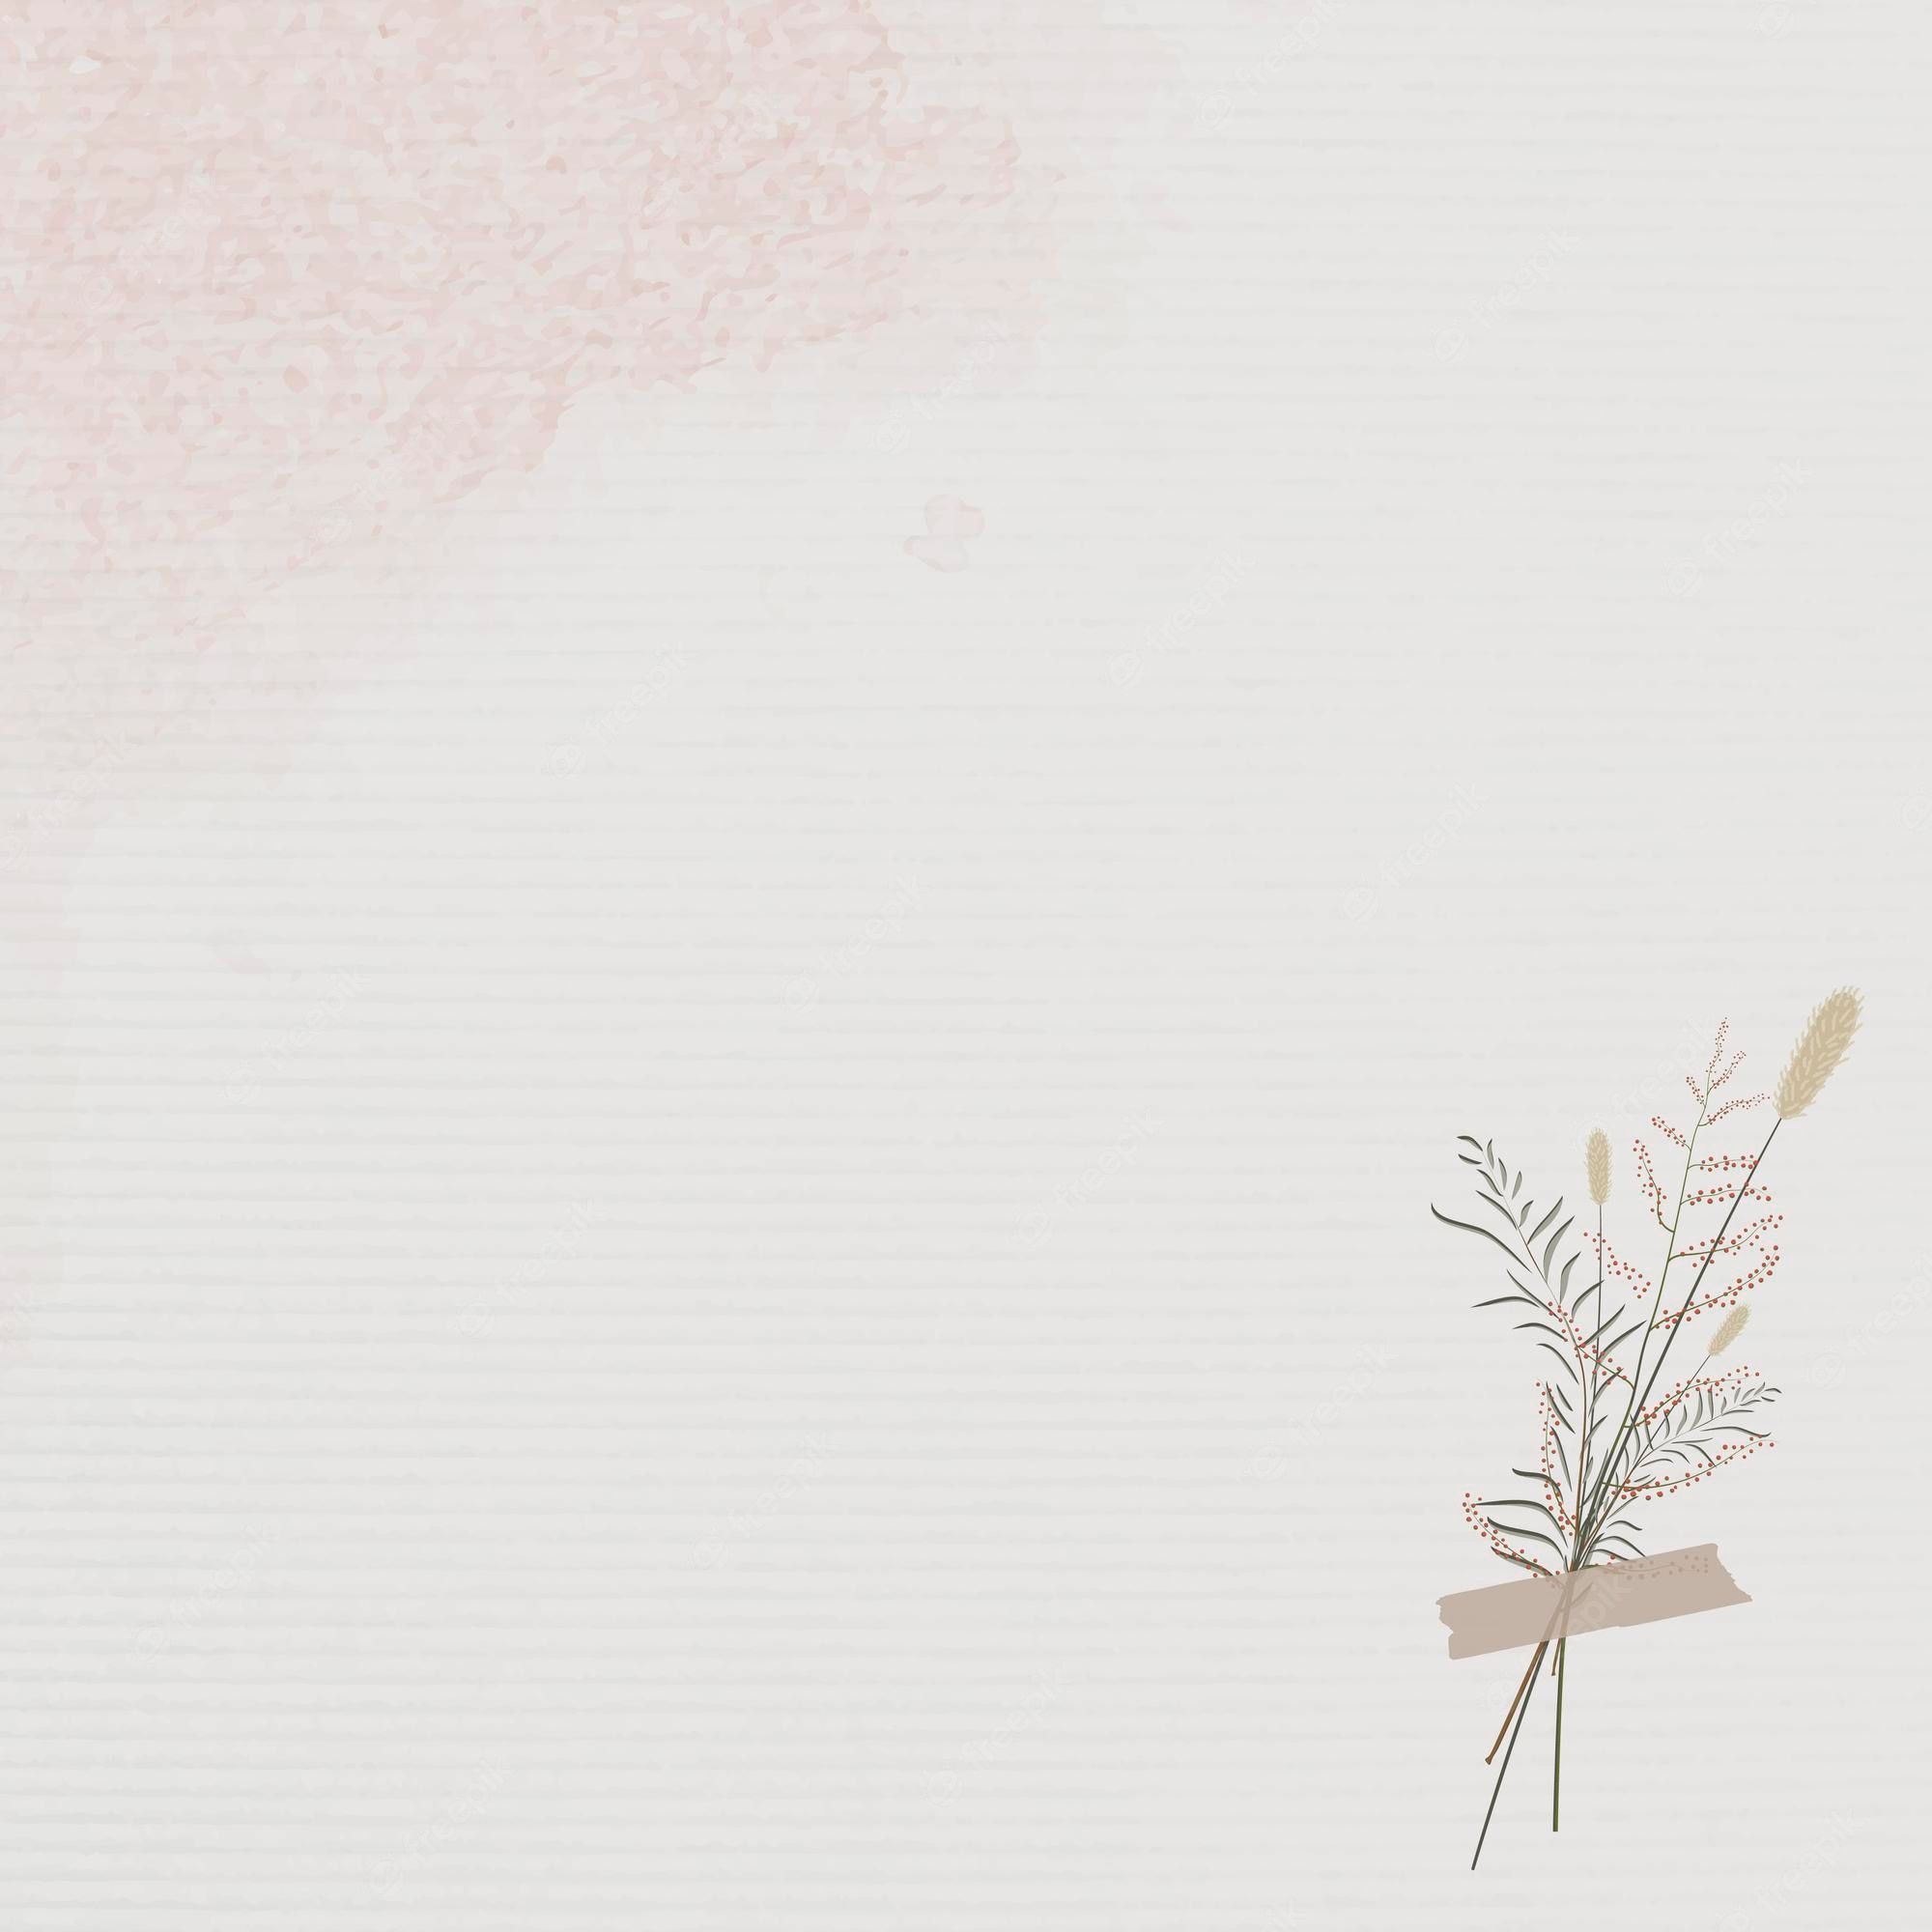 A light pink hydrangea and grasses are tied with a light pink tape on a light pink background. - Minimalist beige